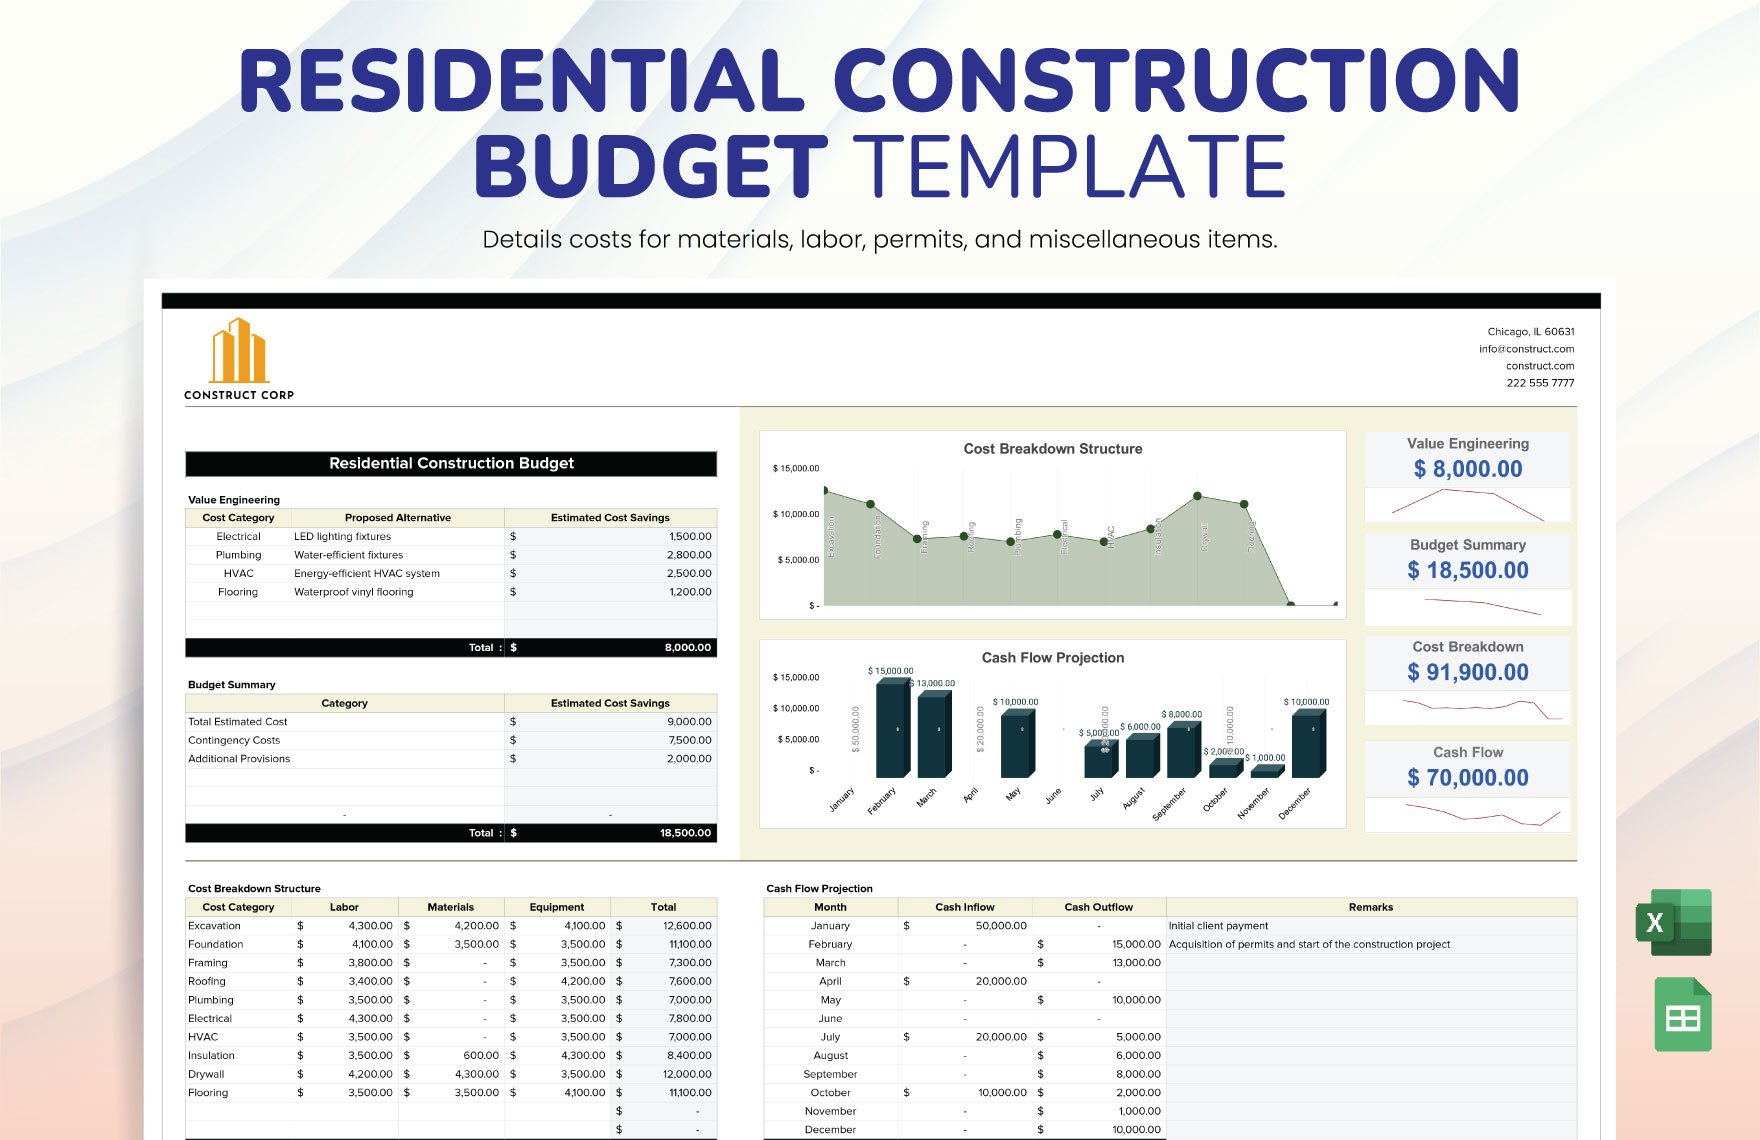 Residential Construction Budget in Excel, Google Sheets